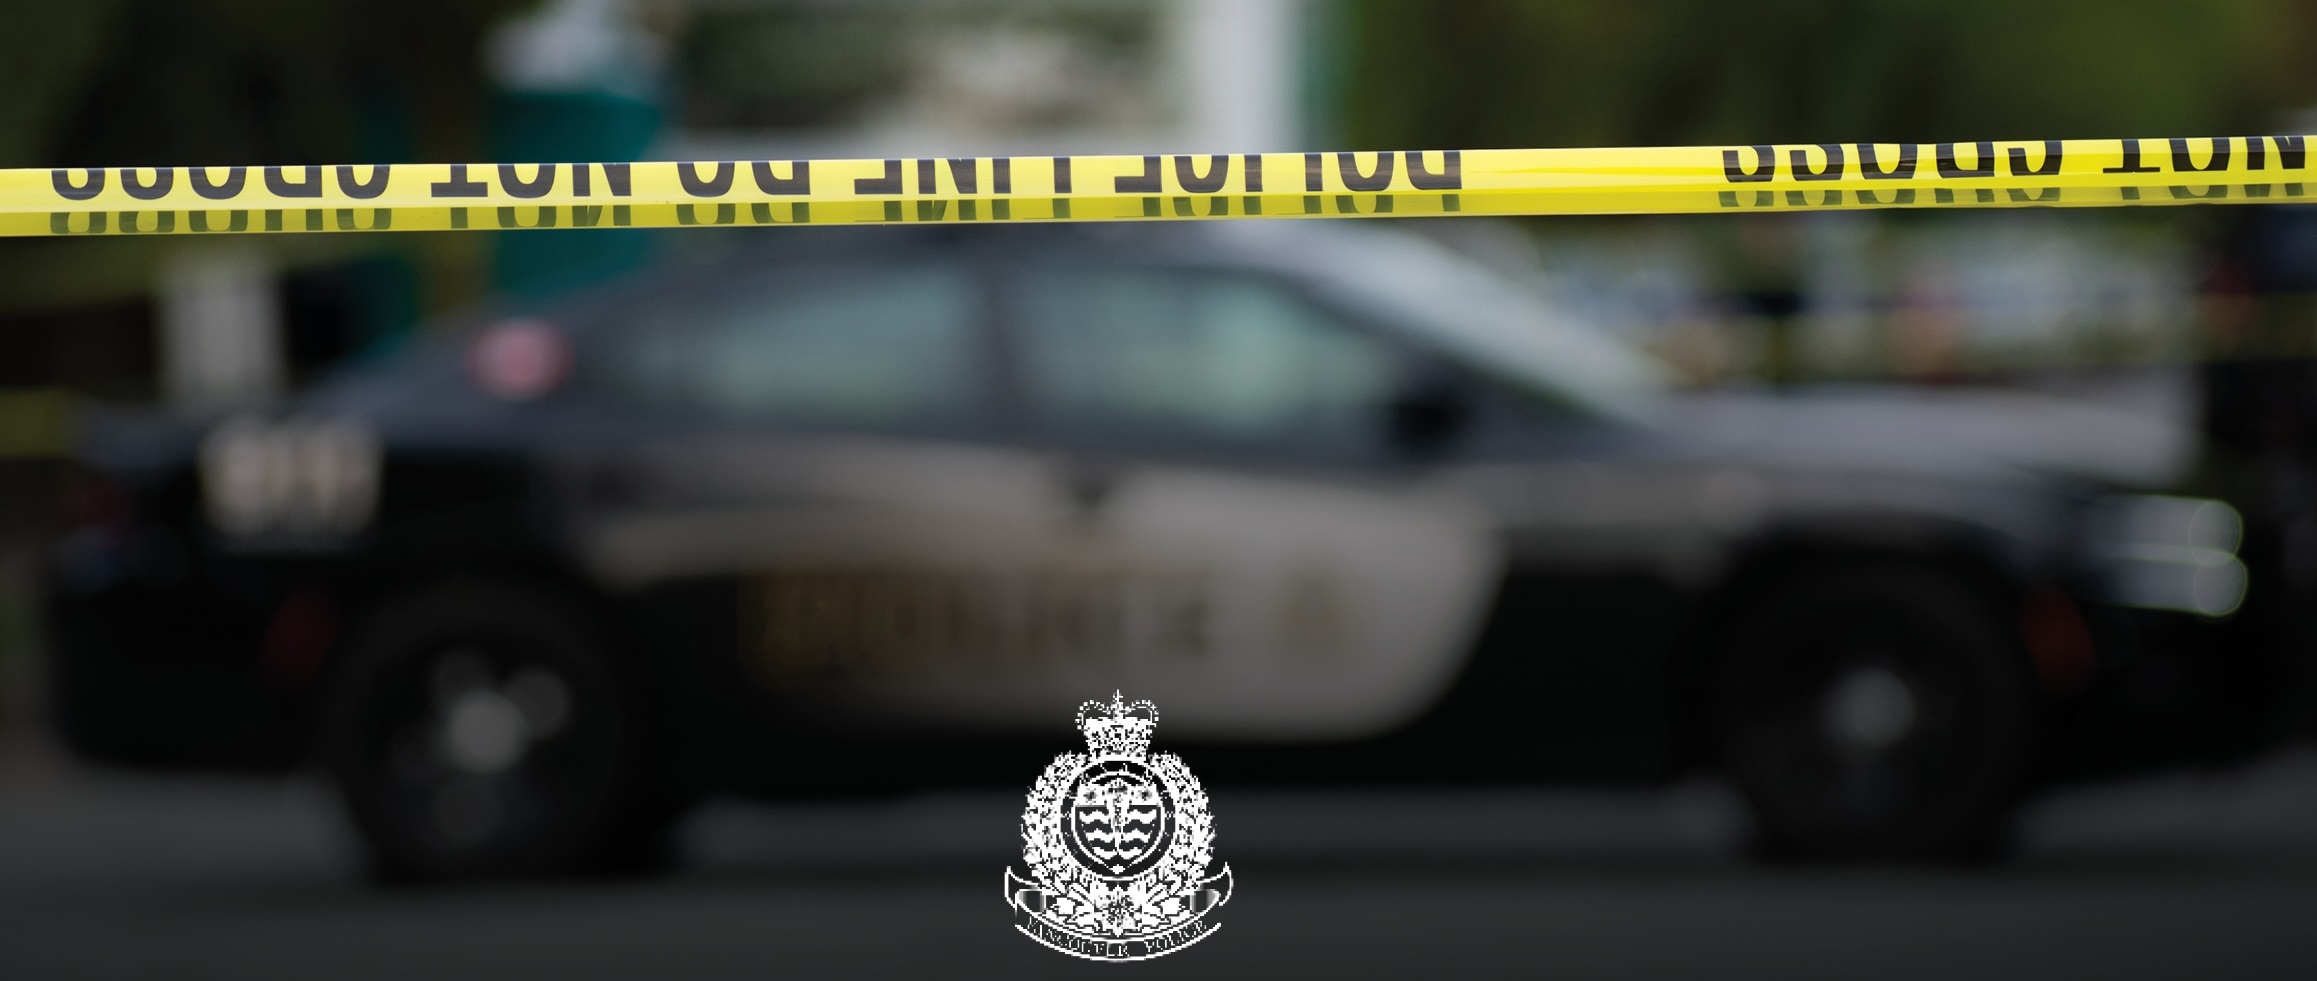 Two charged in connection with violent home invasion incident, Vancouver Police say